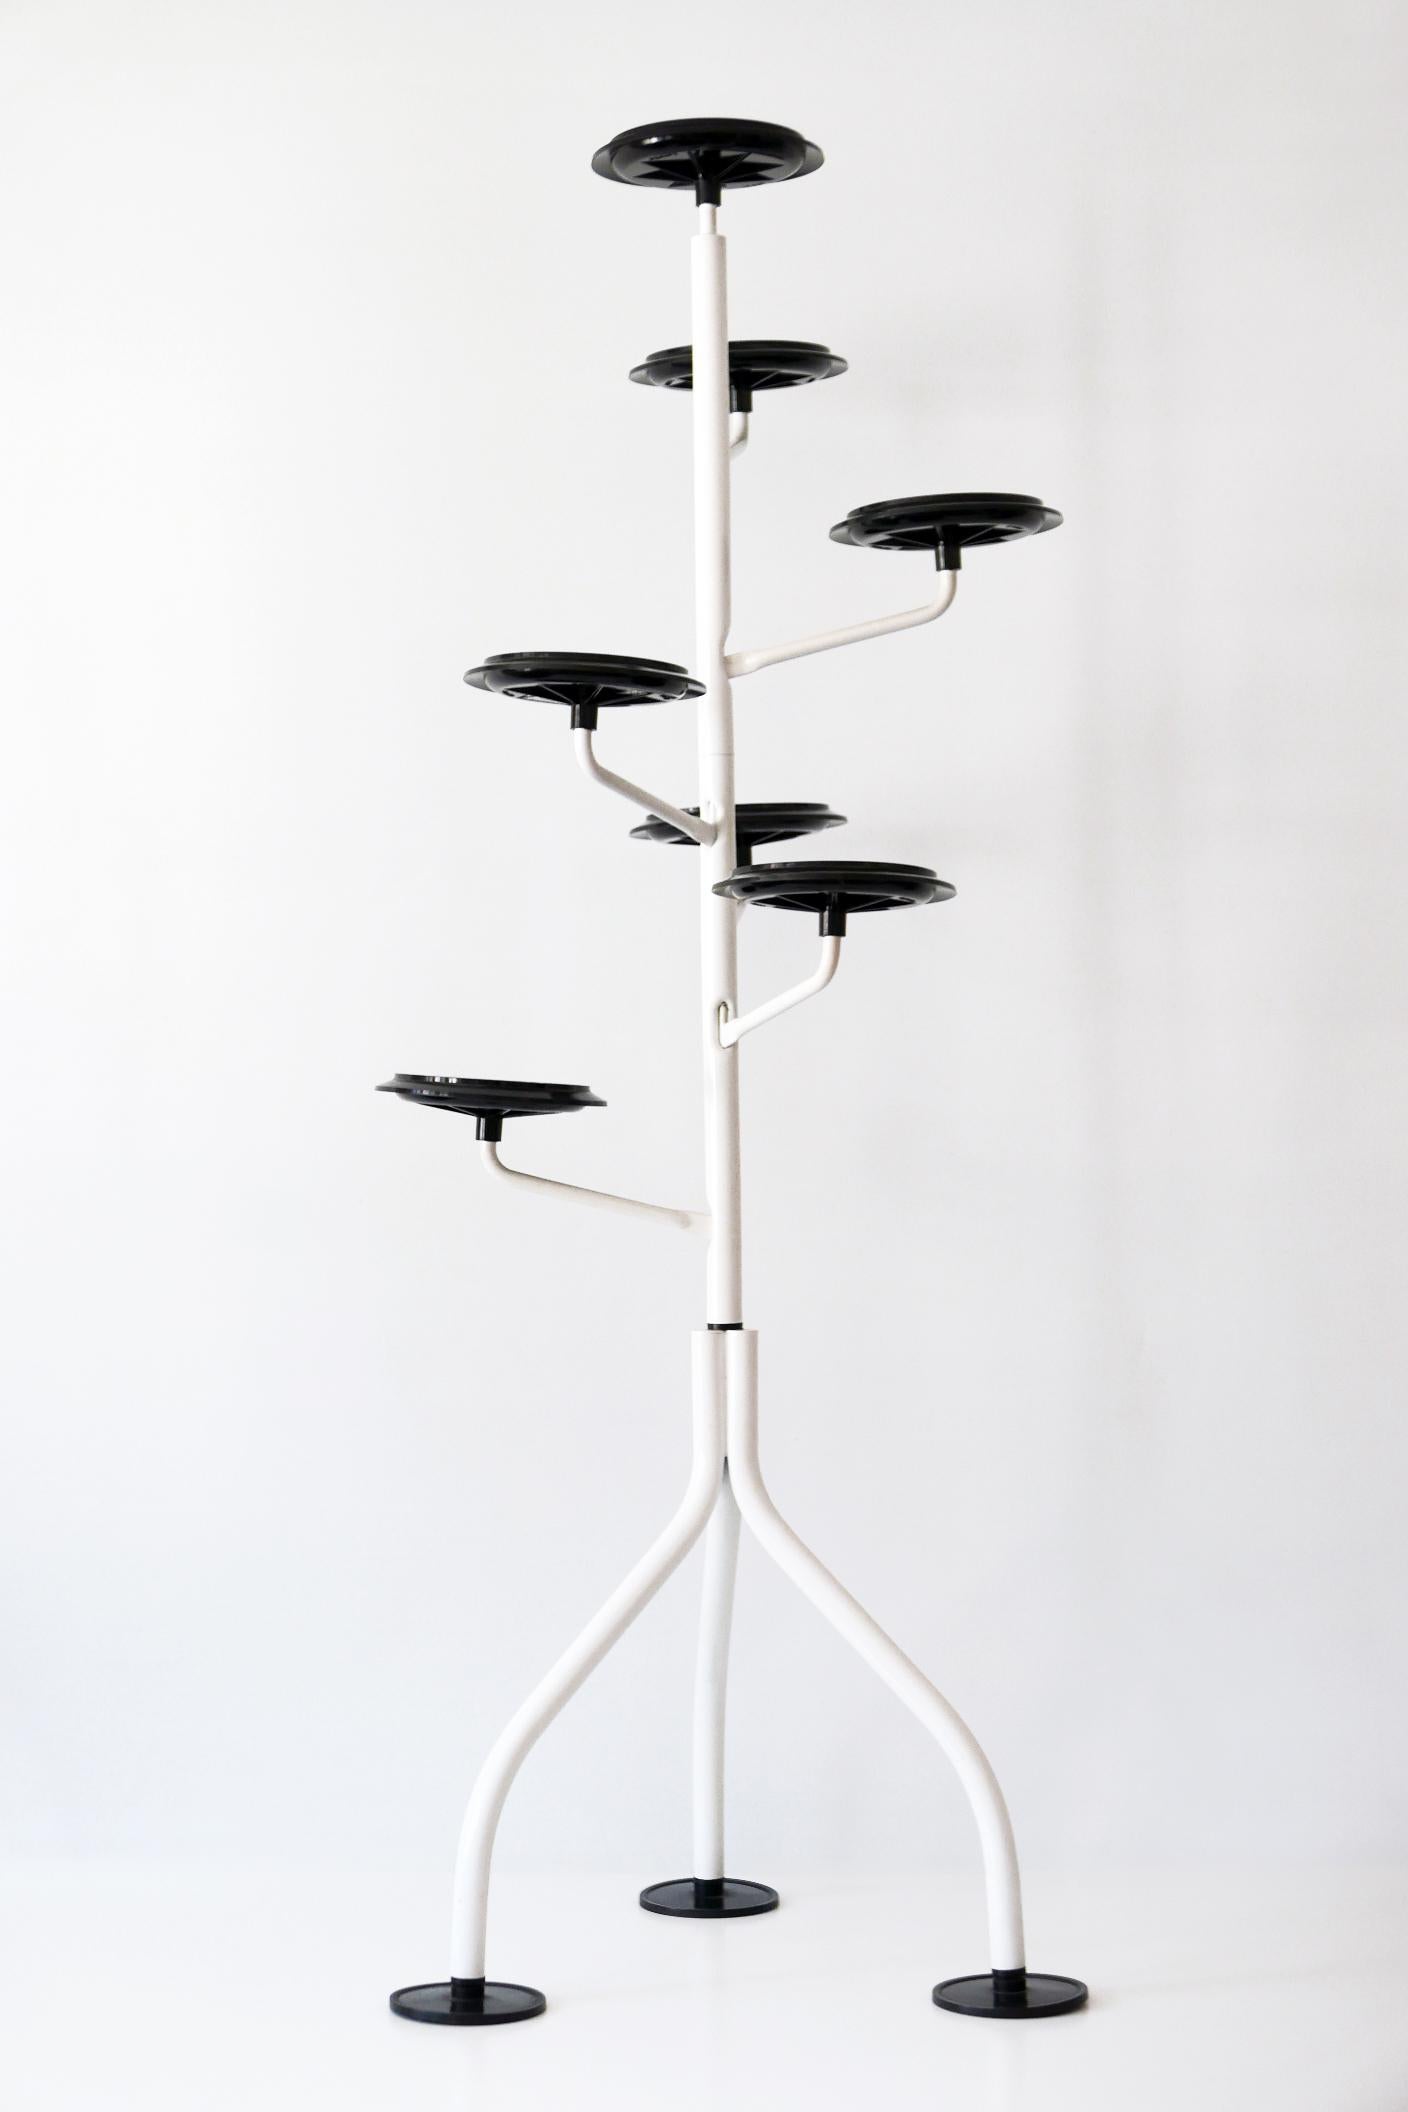 Early edition. Demountable planter or flowerpot stand 'Albero' in shape of a tree. Designed by Achille Castiglioni 1983 for Zanotta, Italy. Marked: Zanotta Italy.

Horizontally, each arm can be turned around by 120 degrees, so to better arrange